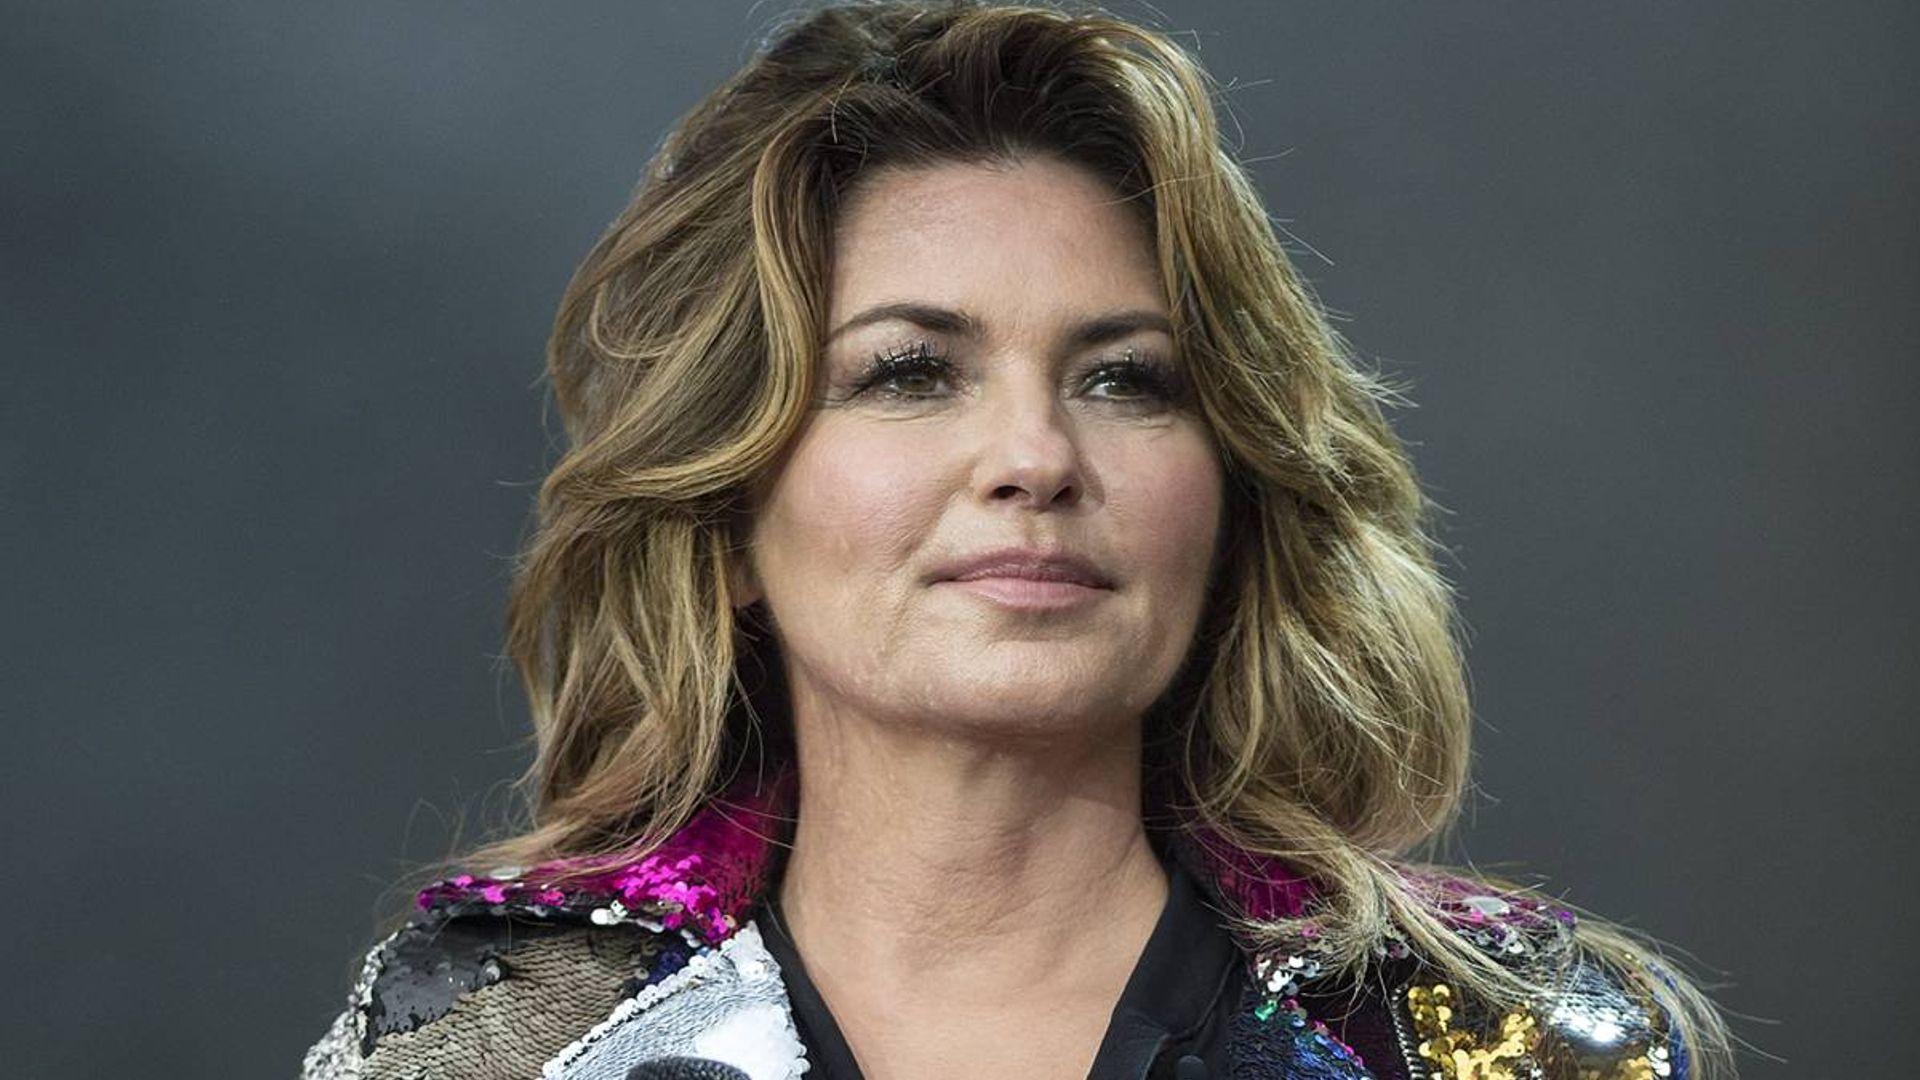 Shania Twain soaks up the sun in gorgeous new photo with her beloved horse